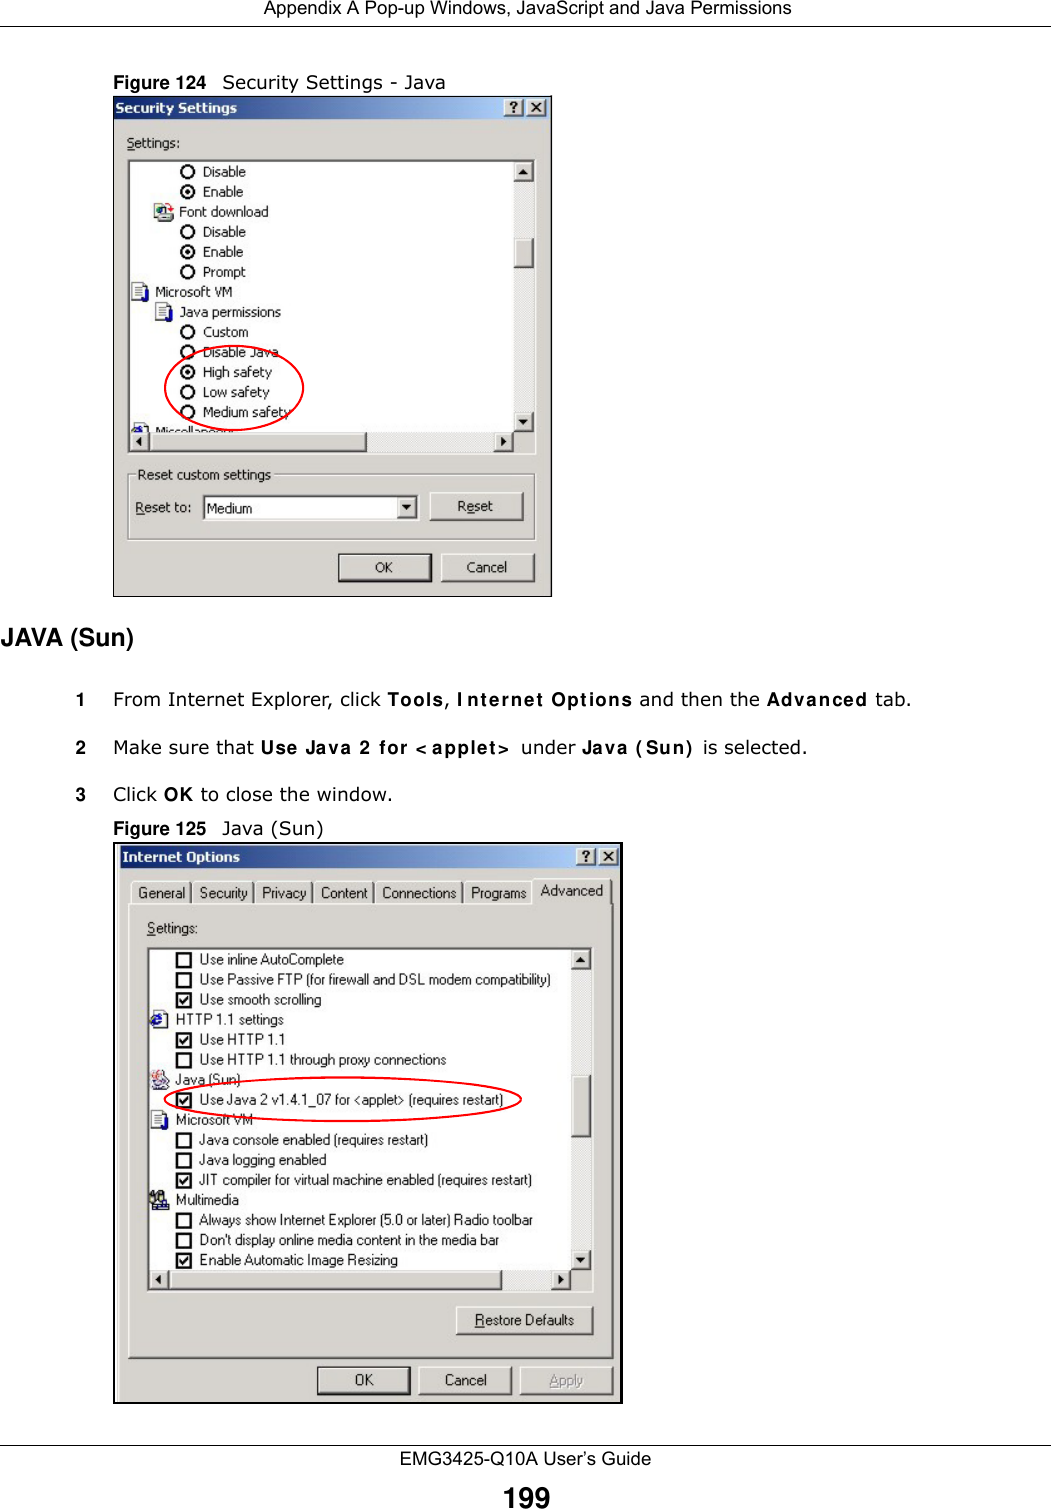  Appendix A Pop-up Windows, JavaScript and Java PermissionsEMG3425-Q10A User’s Guide199Figure 124   Security Settings - Java JAVA (Sun)1From Internet Explorer, click Tools, I nt e r ne t  Opt ions and then the Adva nce d tab. 2Make sure that Use Java 2  for &lt; applet &gt;  under Java ( Sun)  is selected.3Click OK to close the window.Figure 125   Java (Sun)